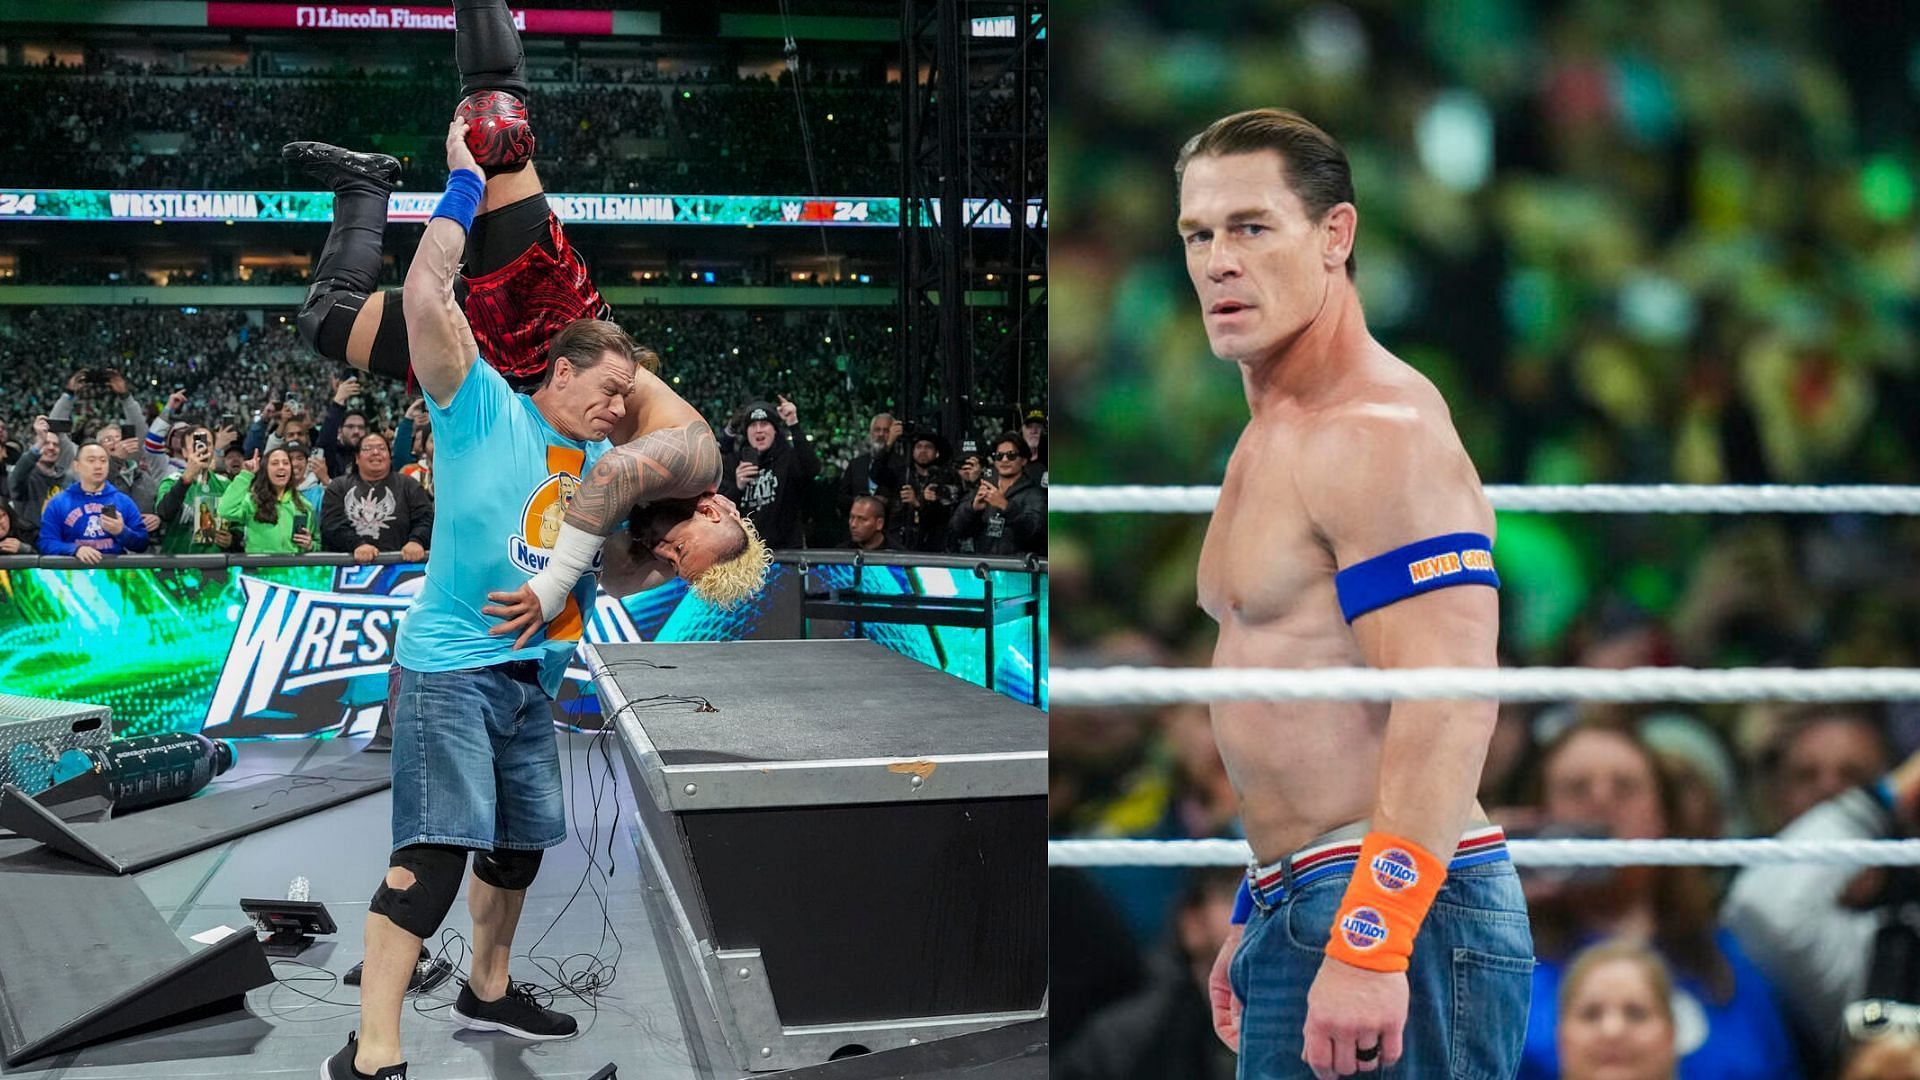 John Cena is nearing the end of his illustrious career.